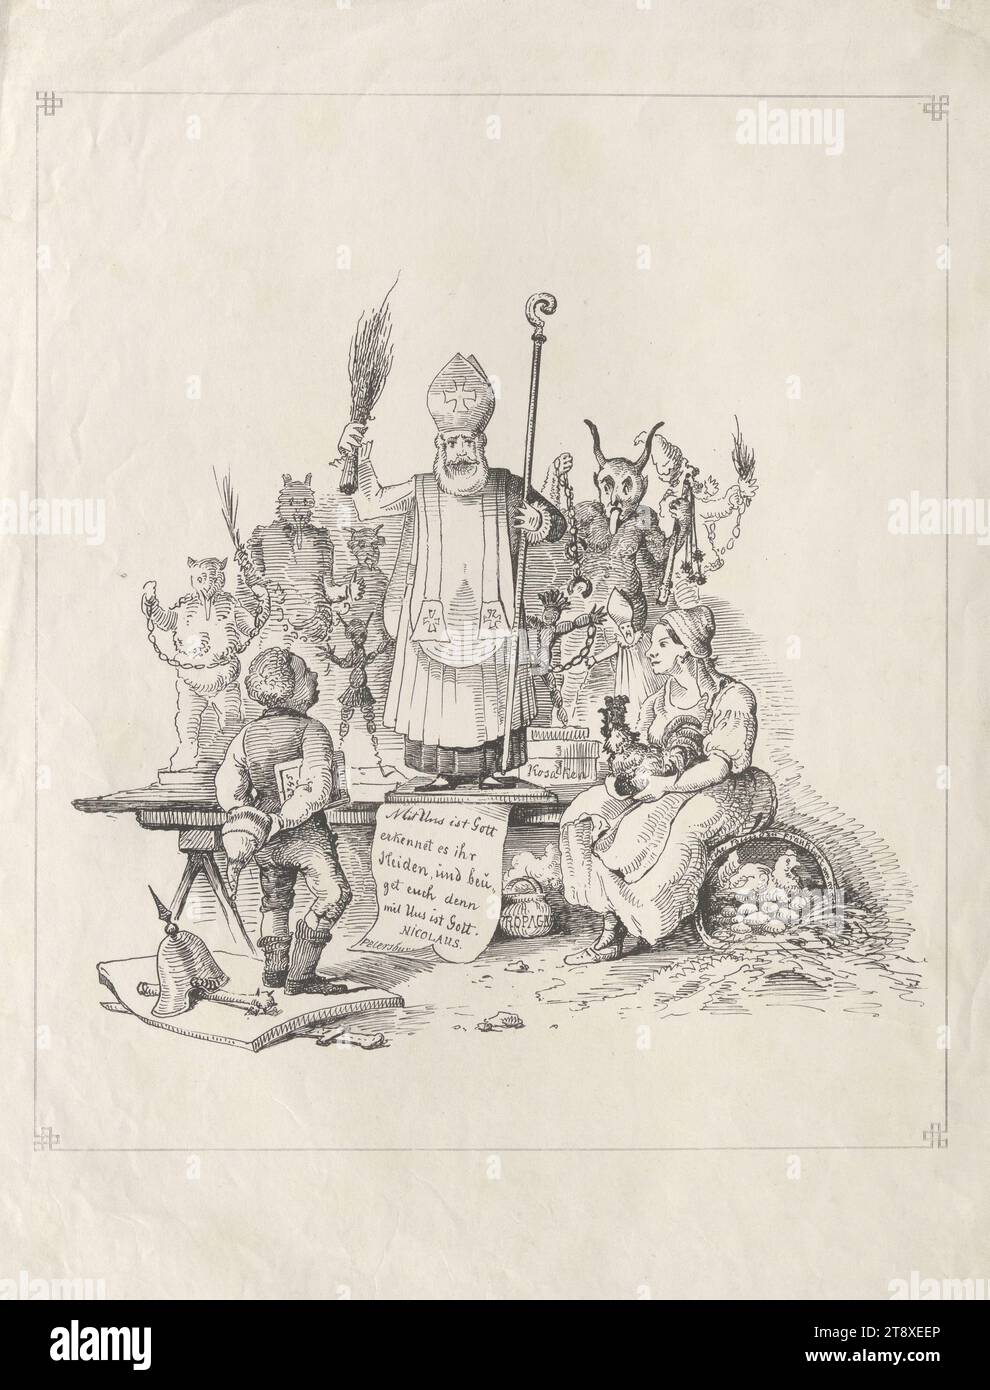 German caricature of Tsar Nicholas I and the Russian attitude to the 1848 revolution, Unknown, 1848, paper, pen and ink-manner lithograph, height 43, 8 cm, width 34, 2 cm, Caricature, Satire, Politics, Revolutions of 1848, 1849, Saint Nicholas, devil(s) and demons, Krampus, king; emperor, ruler, sovereign, The Vienna Collection Stock Photo